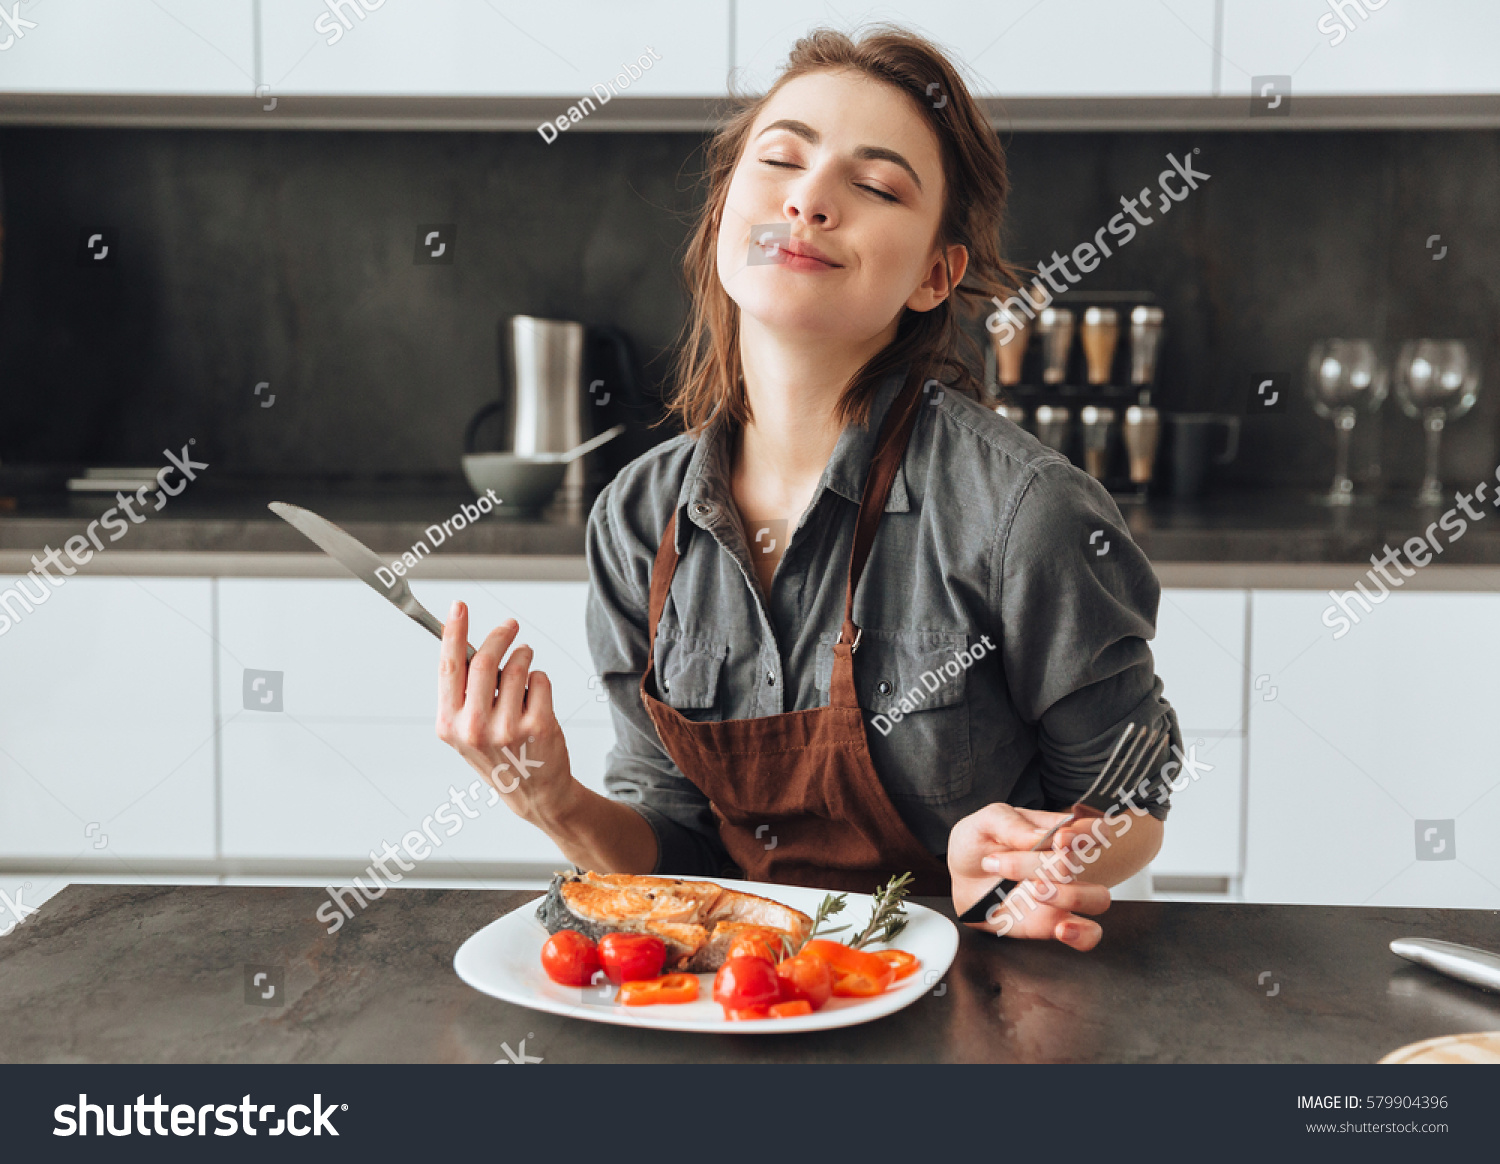 Image of pretty young woman sitting in kitchen while eating fish and tomatoes. #579904396